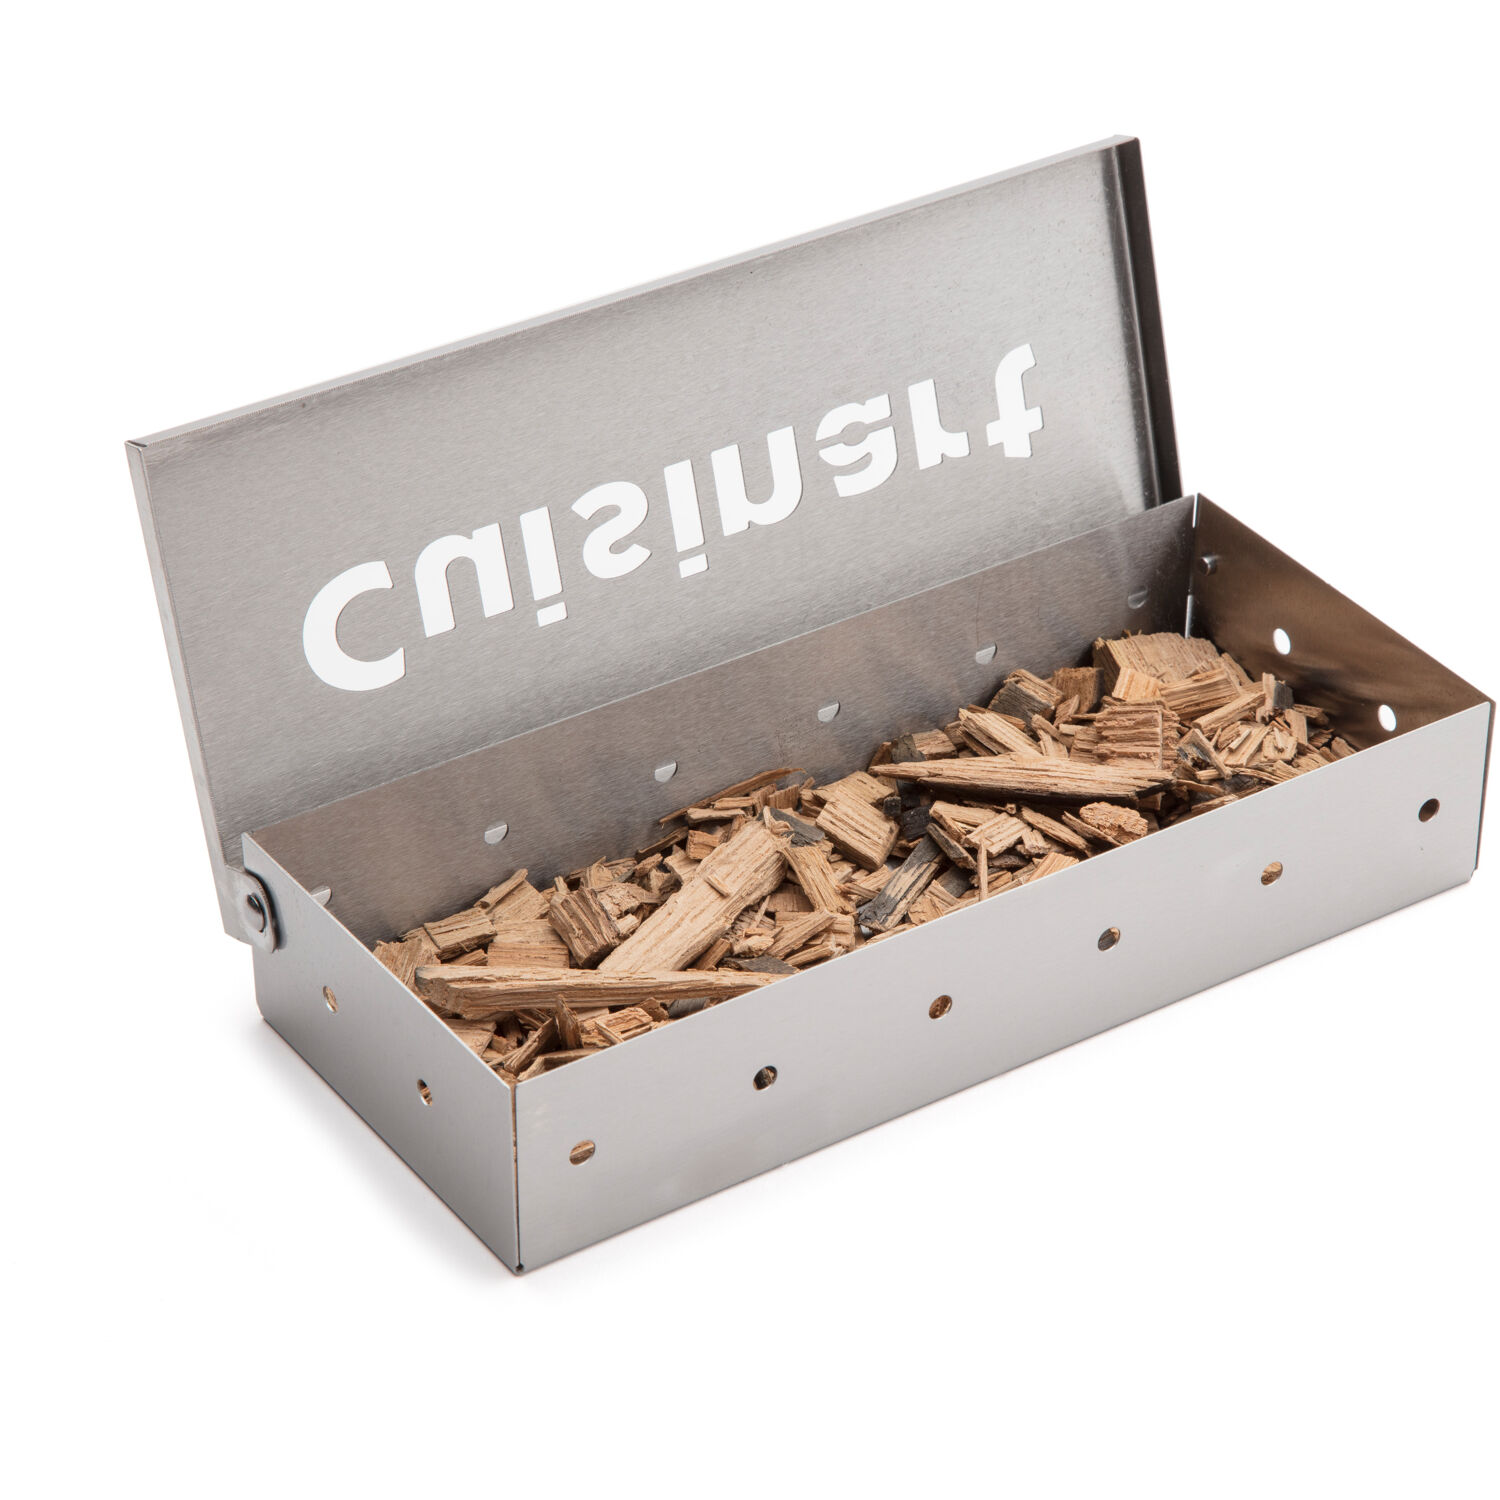 Cuisinart Wood Chip Smoker Box in Stainless Steel - image 3 of 8